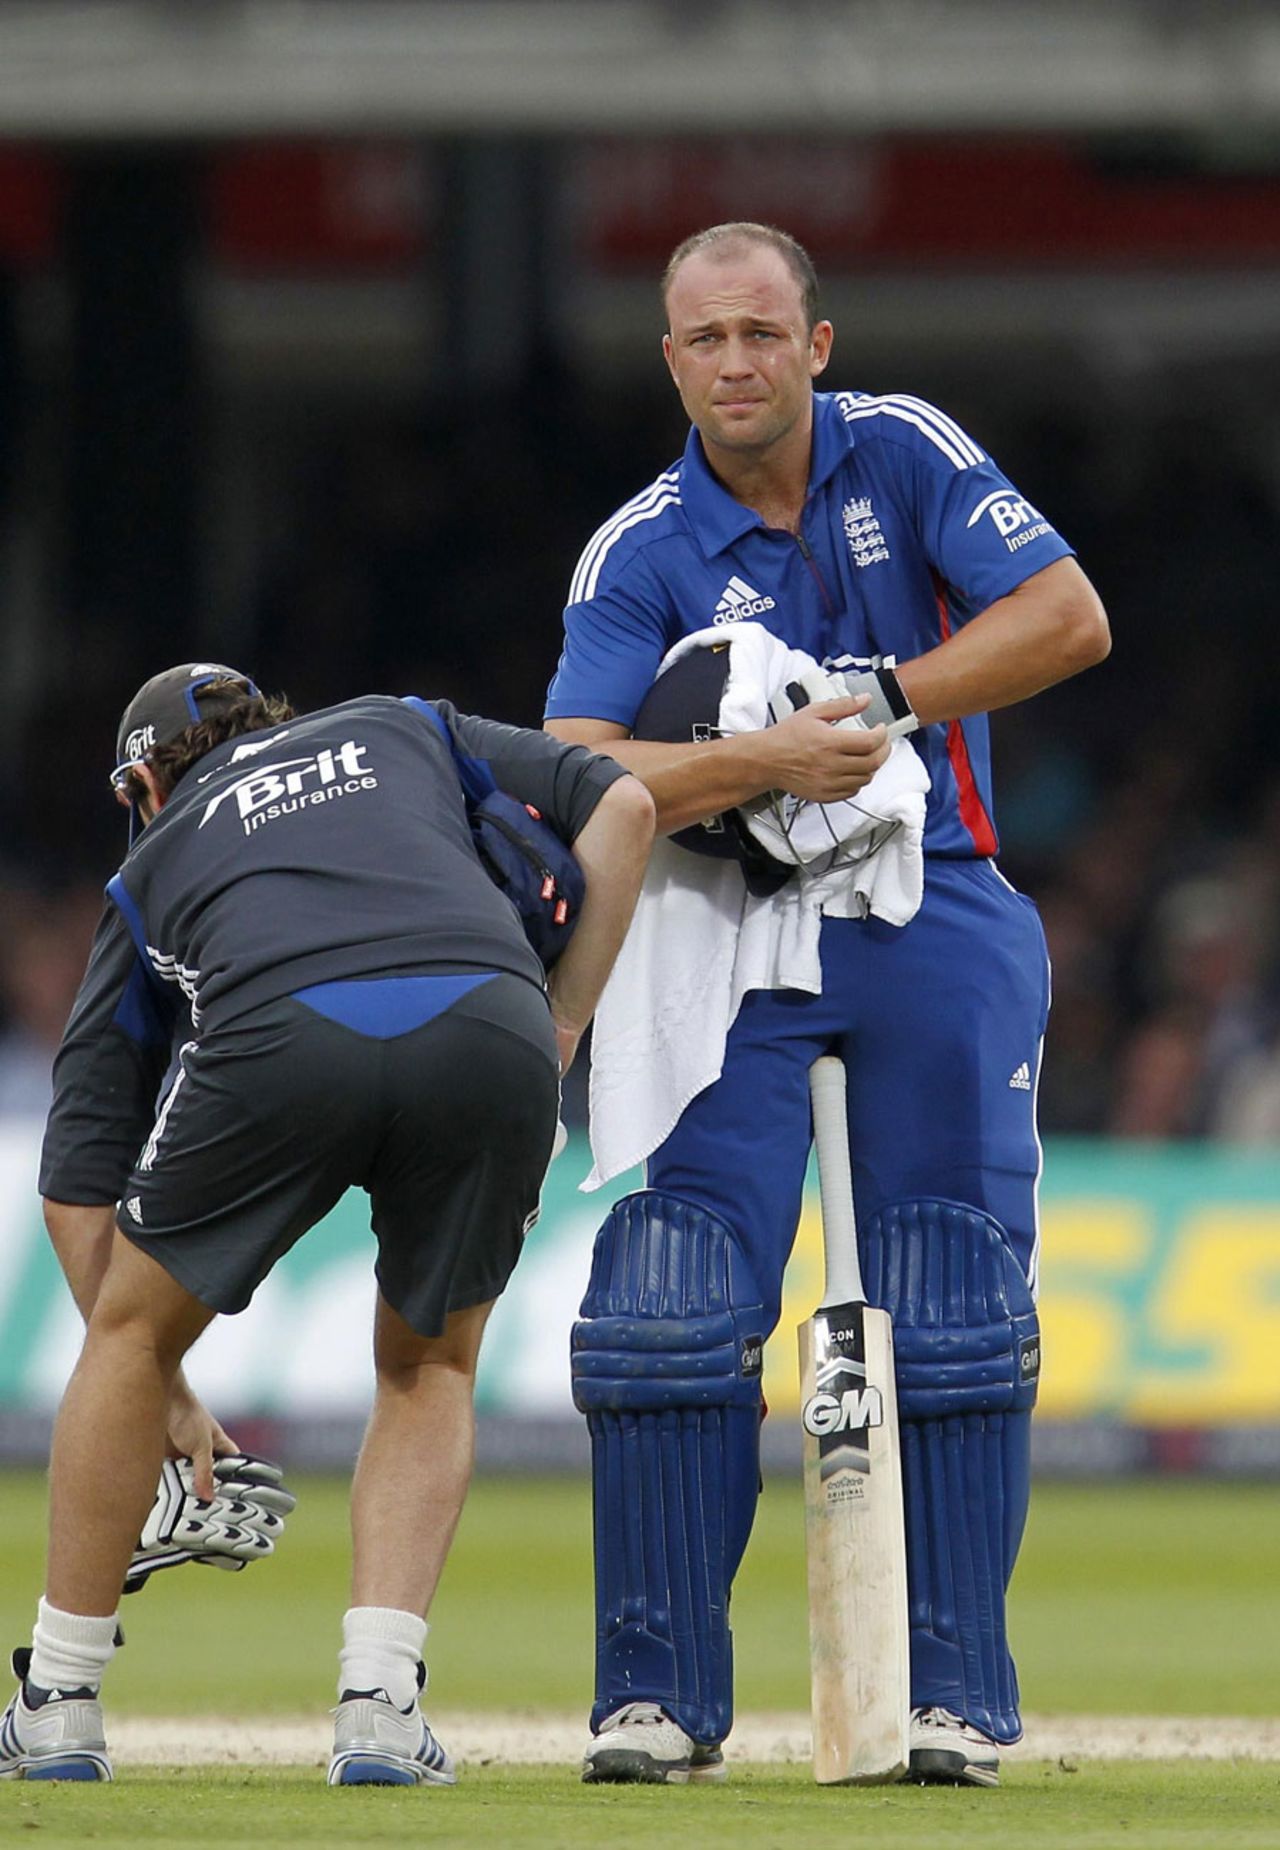 Jonathan Trott struggled with a hand injury, England v South Africa, 4th ODI, Lord's, September 2, 2012